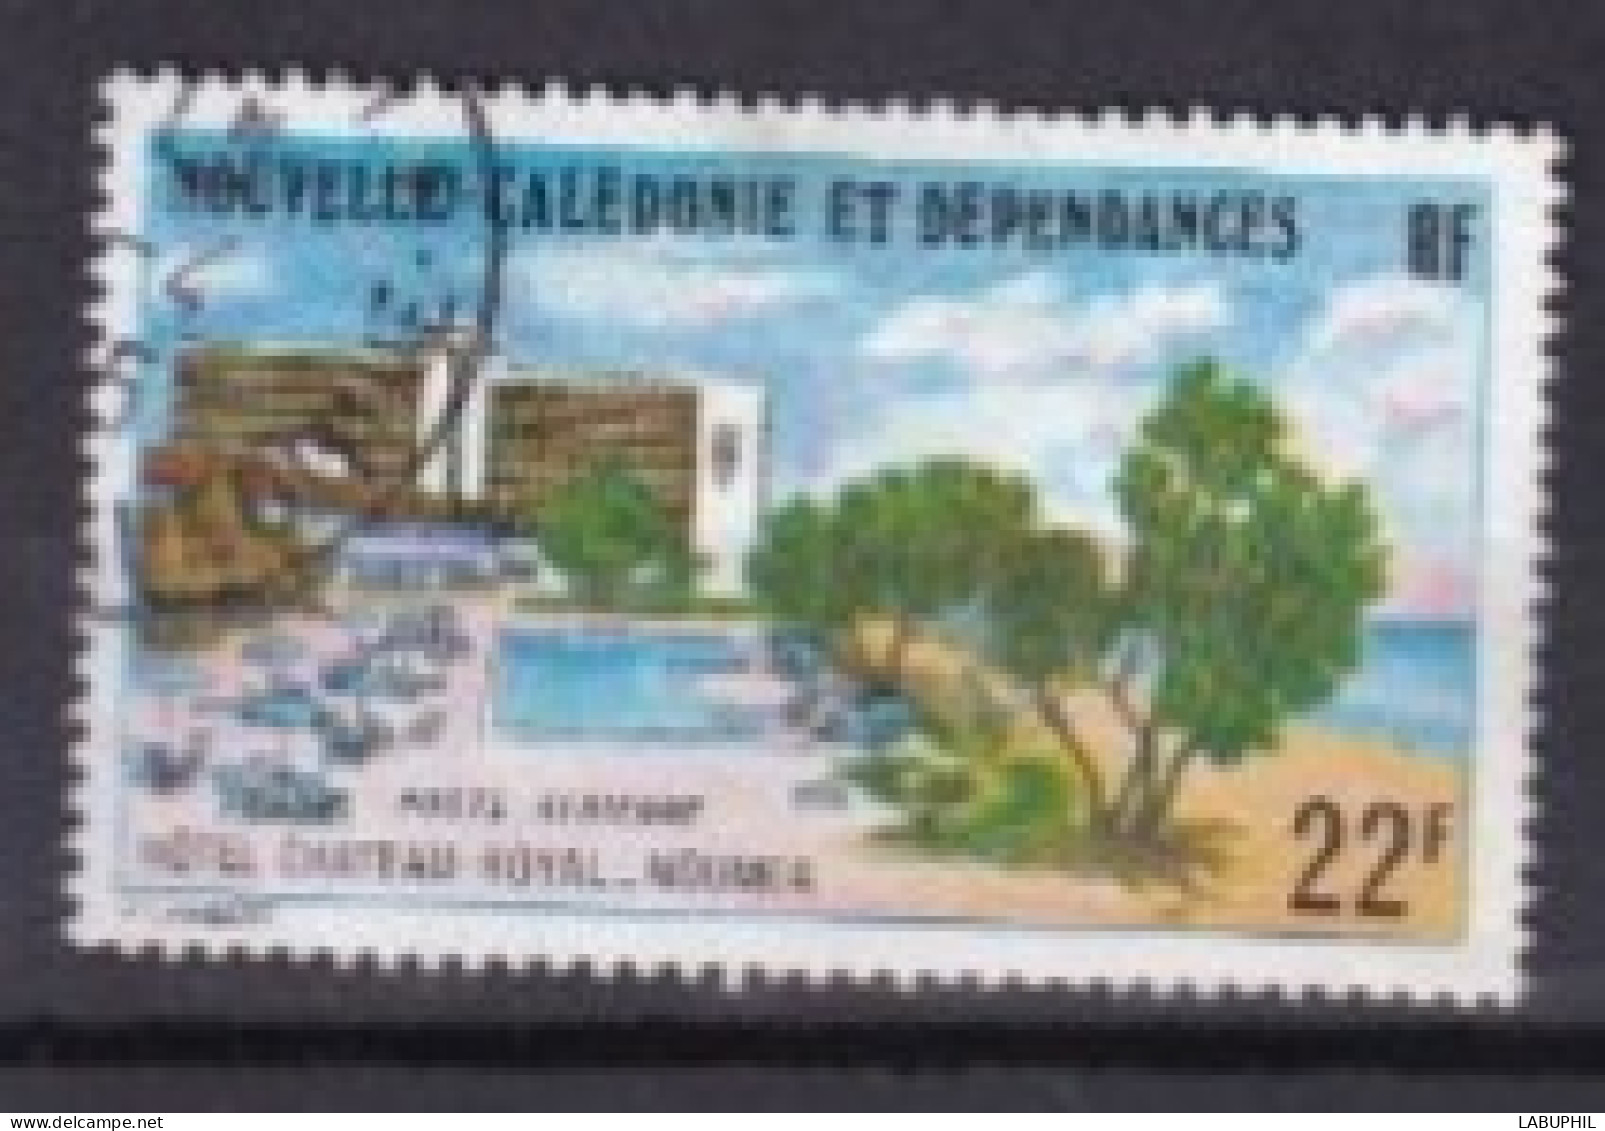 NOUVELLE CALEDONIE Dispersion D'une Collection Oblitéré Used  1975 - Used Stamps